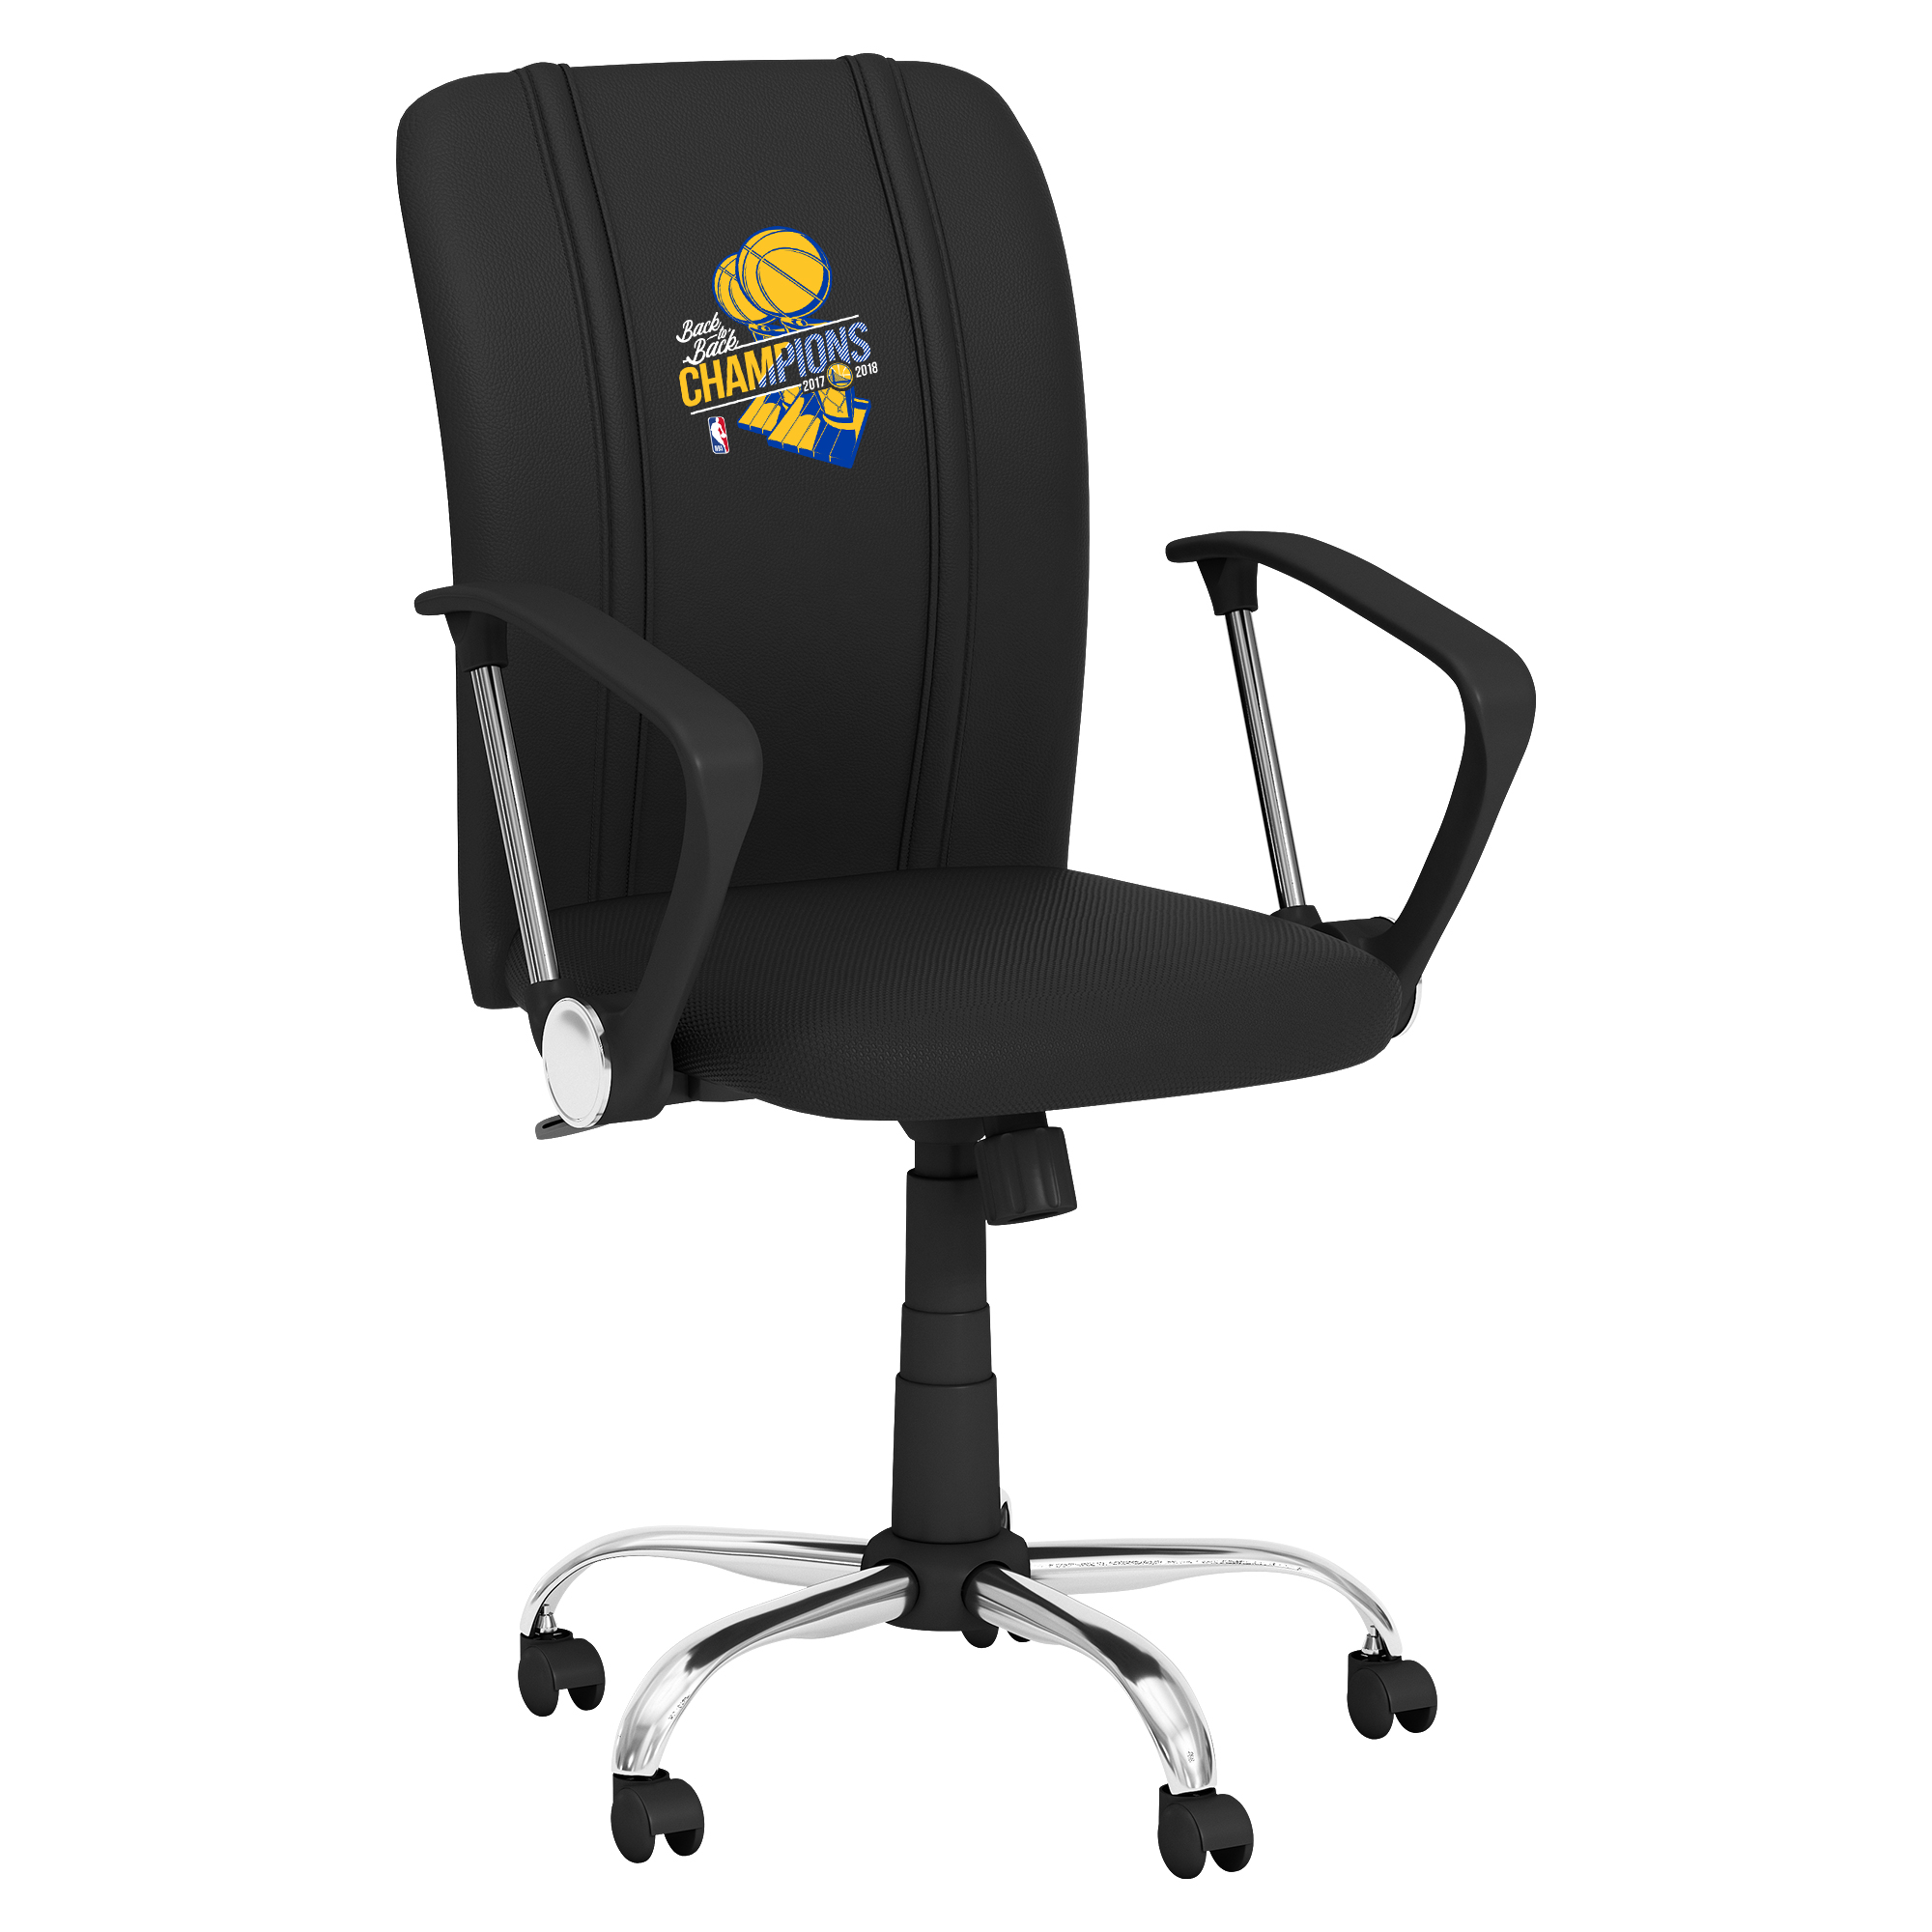 Golden State Warriors Curve Task Chair with Golden State Warriors 2018 Champions Logo Panel